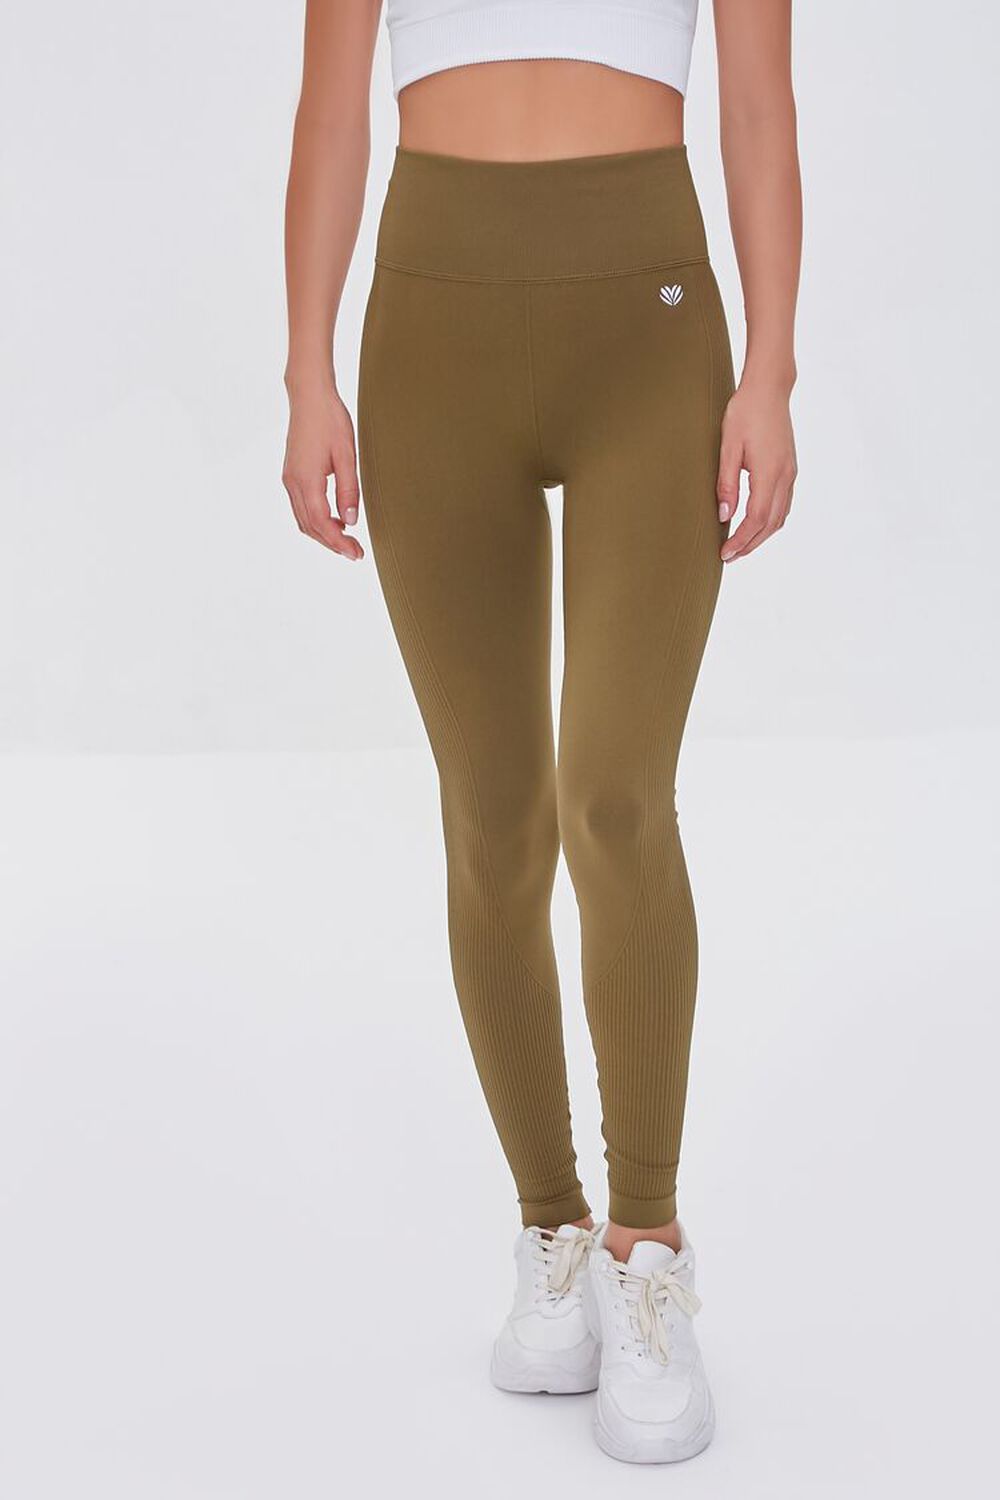 OLIVE Active Seamless High-Rise Leggings, image 2